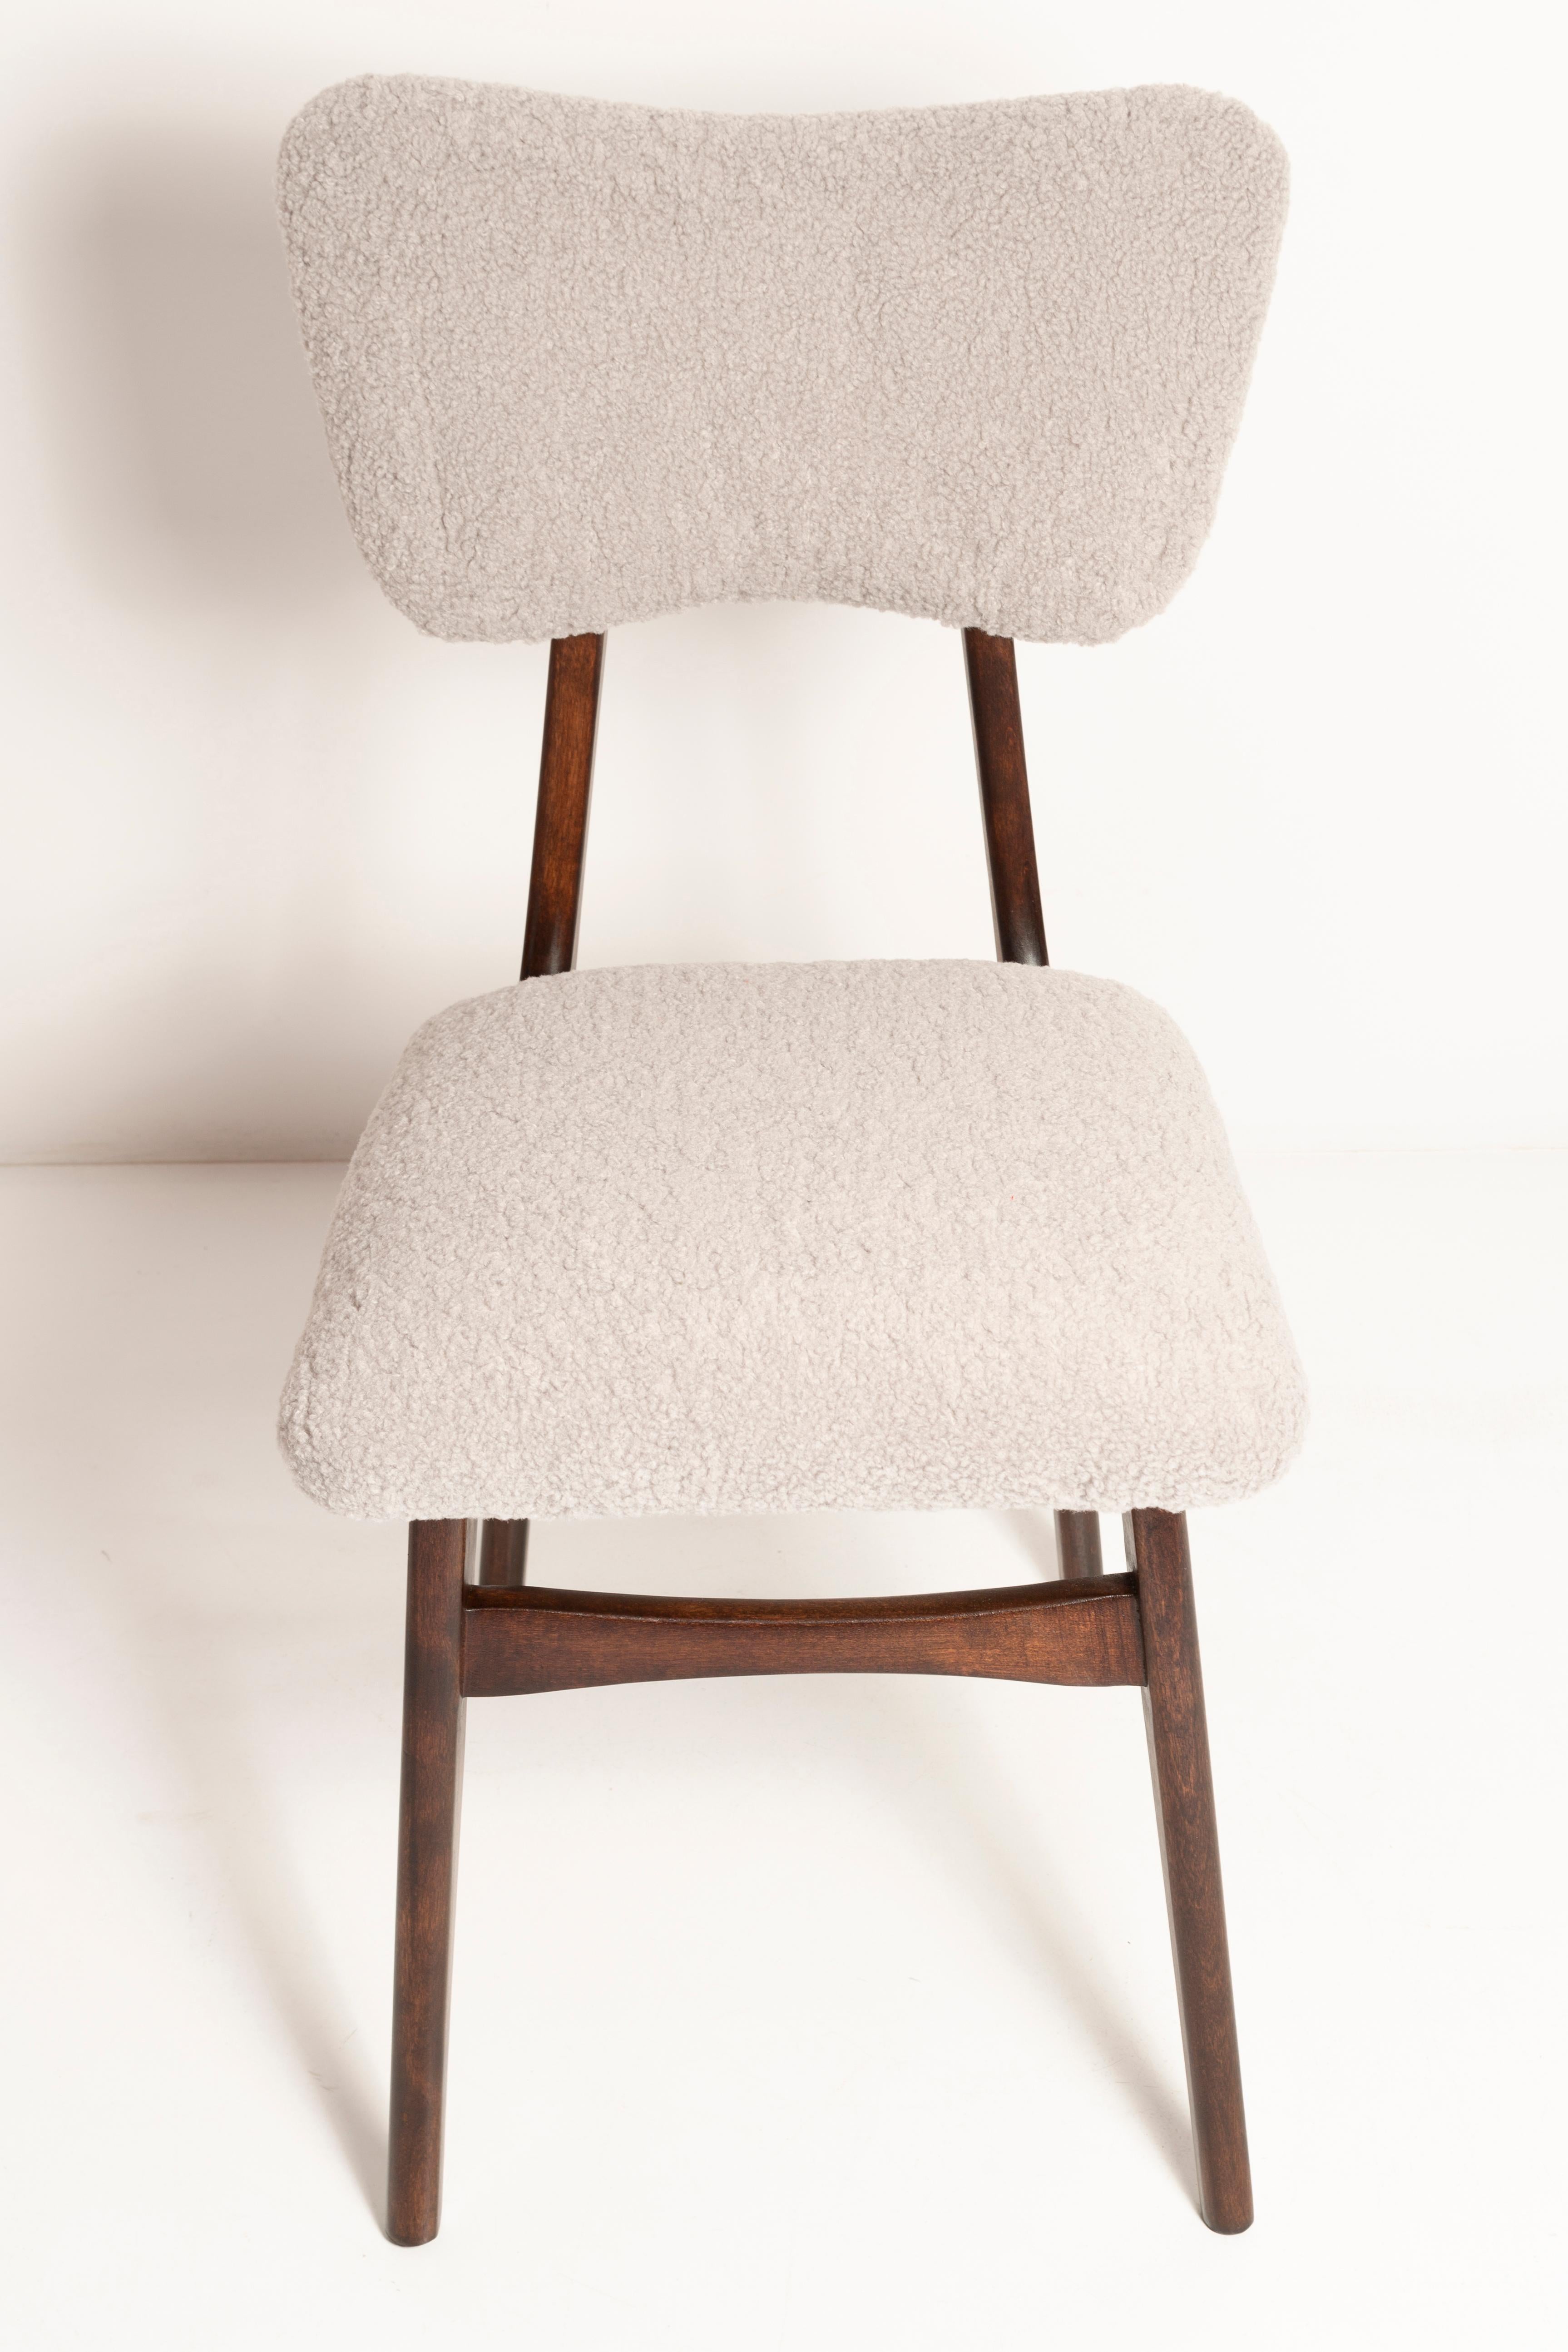 Mid Century Butterfly Chair, Light Gray Boucle, Dark Walnut Wood, Europe, 1960s For Sale 5